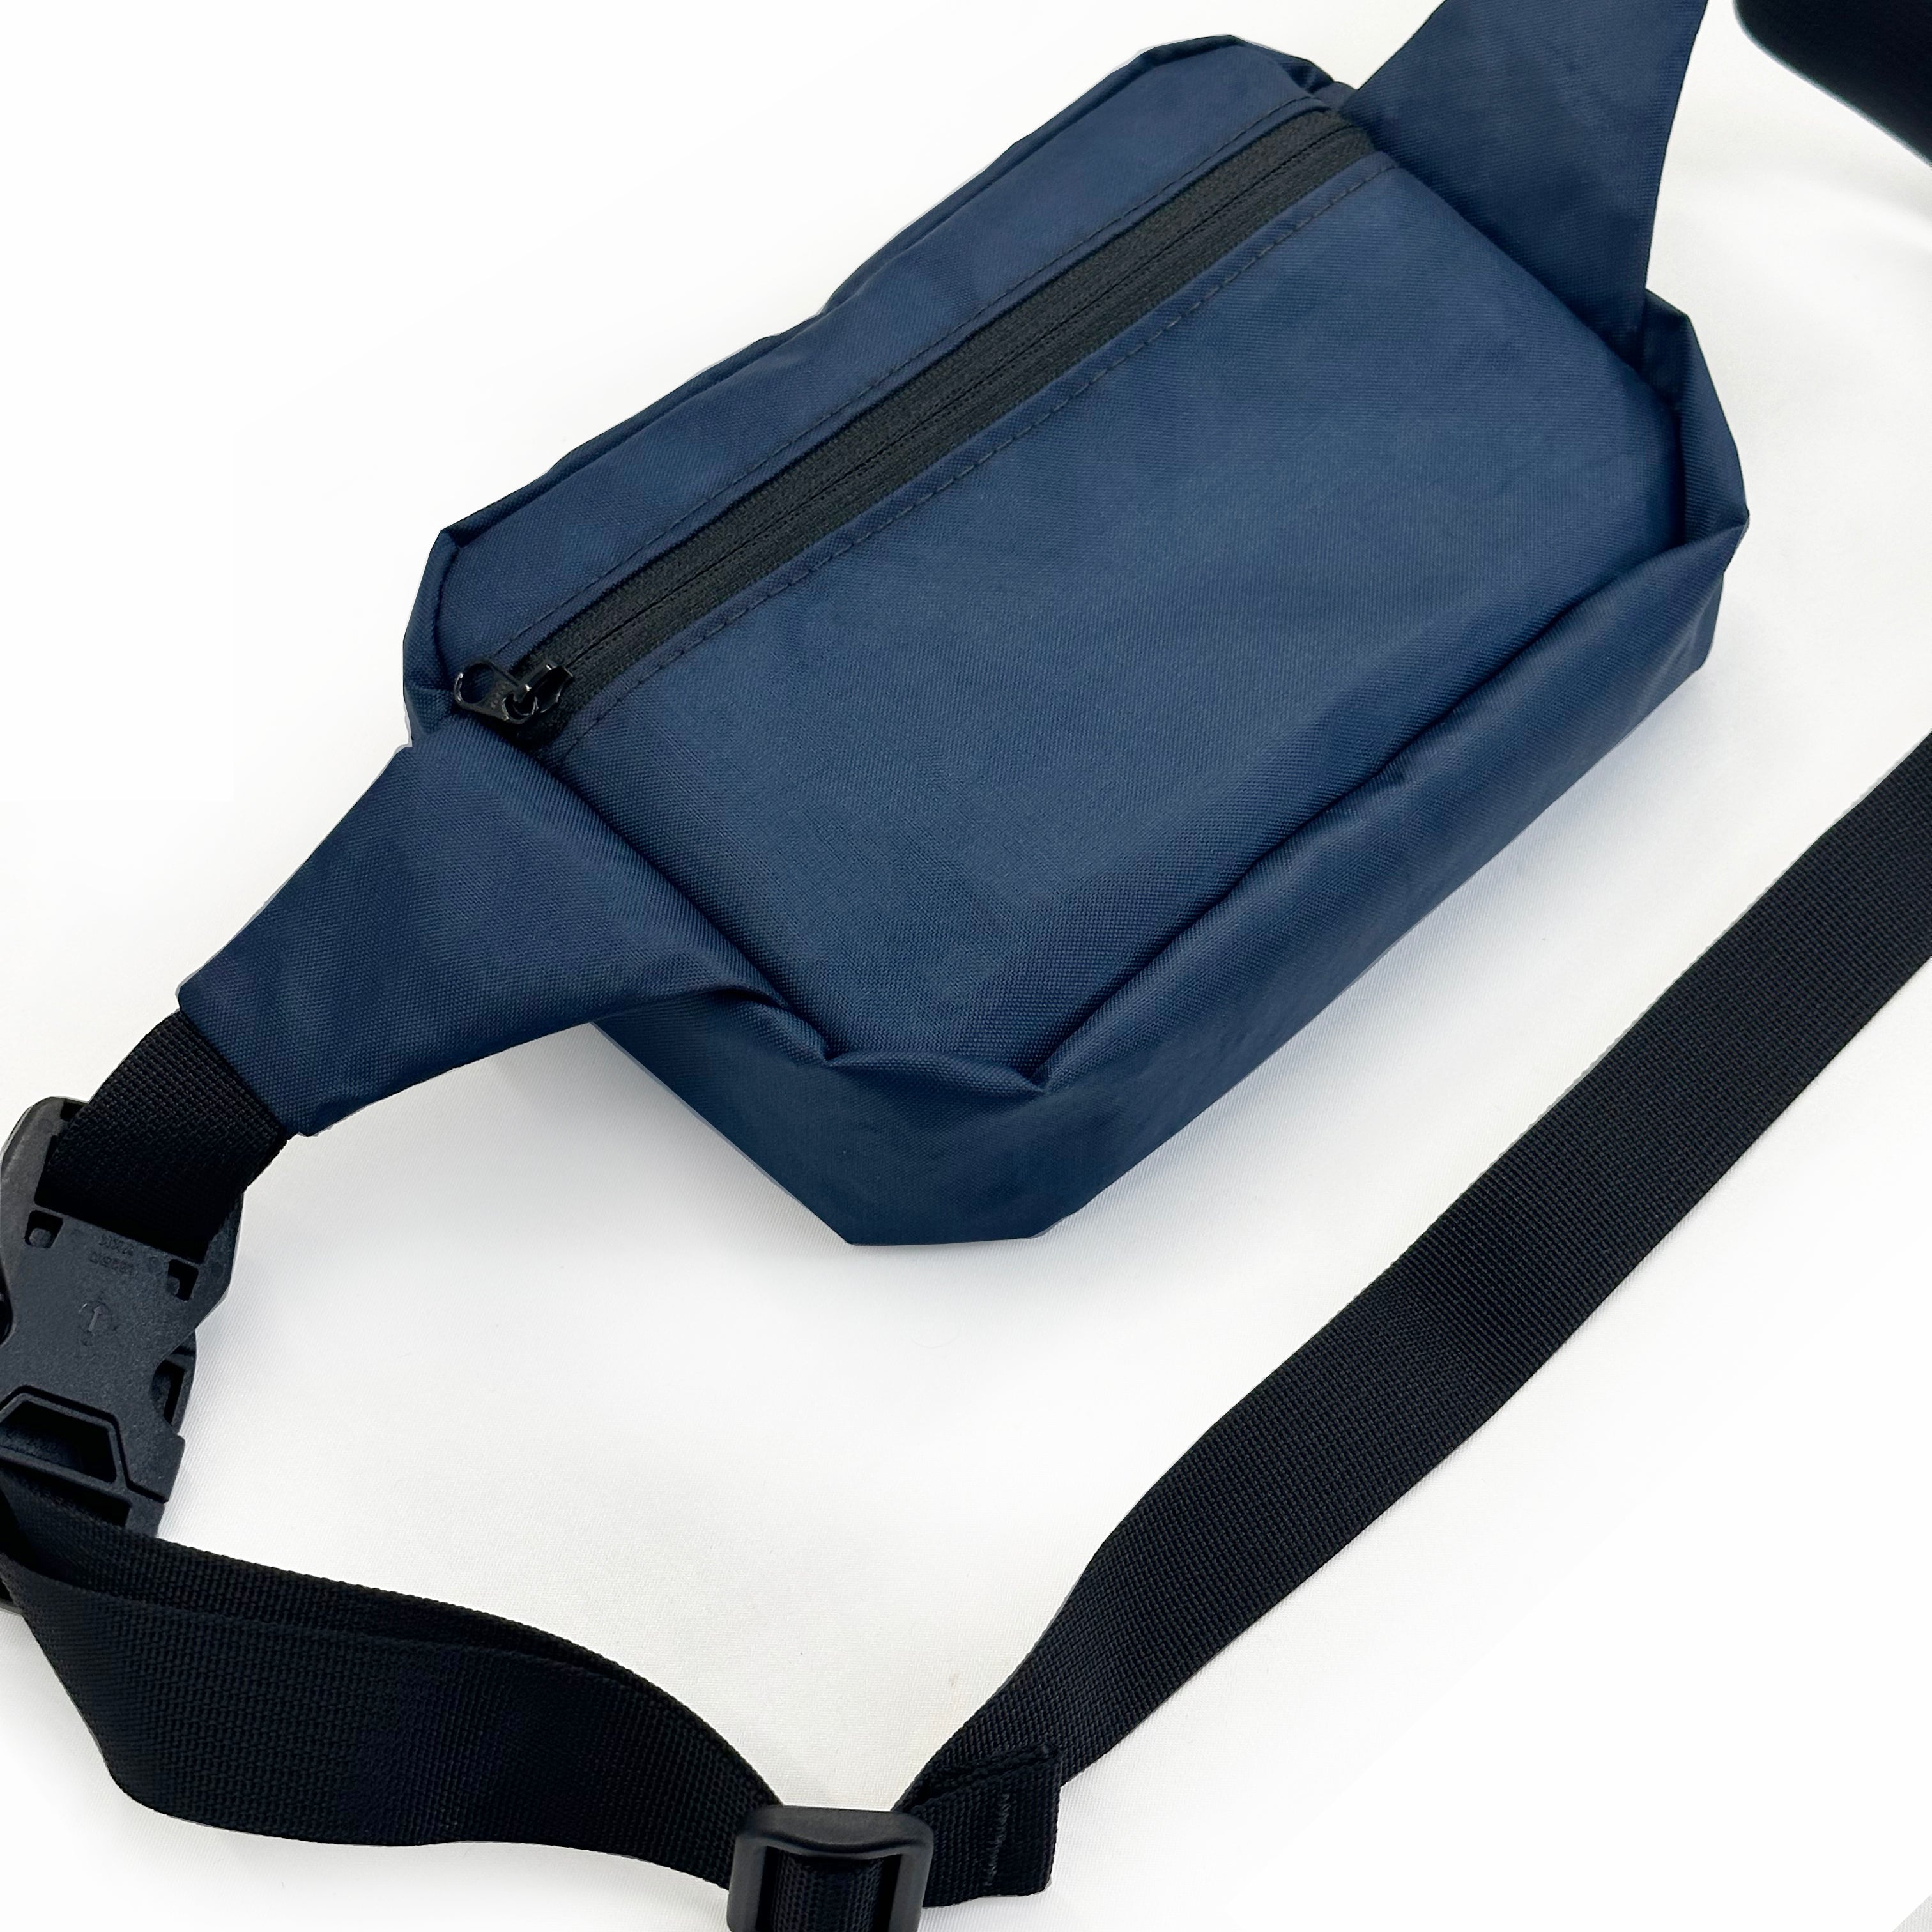 Durable and weather-resistant MITA x Flowfold Explorer Fanny Pack - Recycled Navy